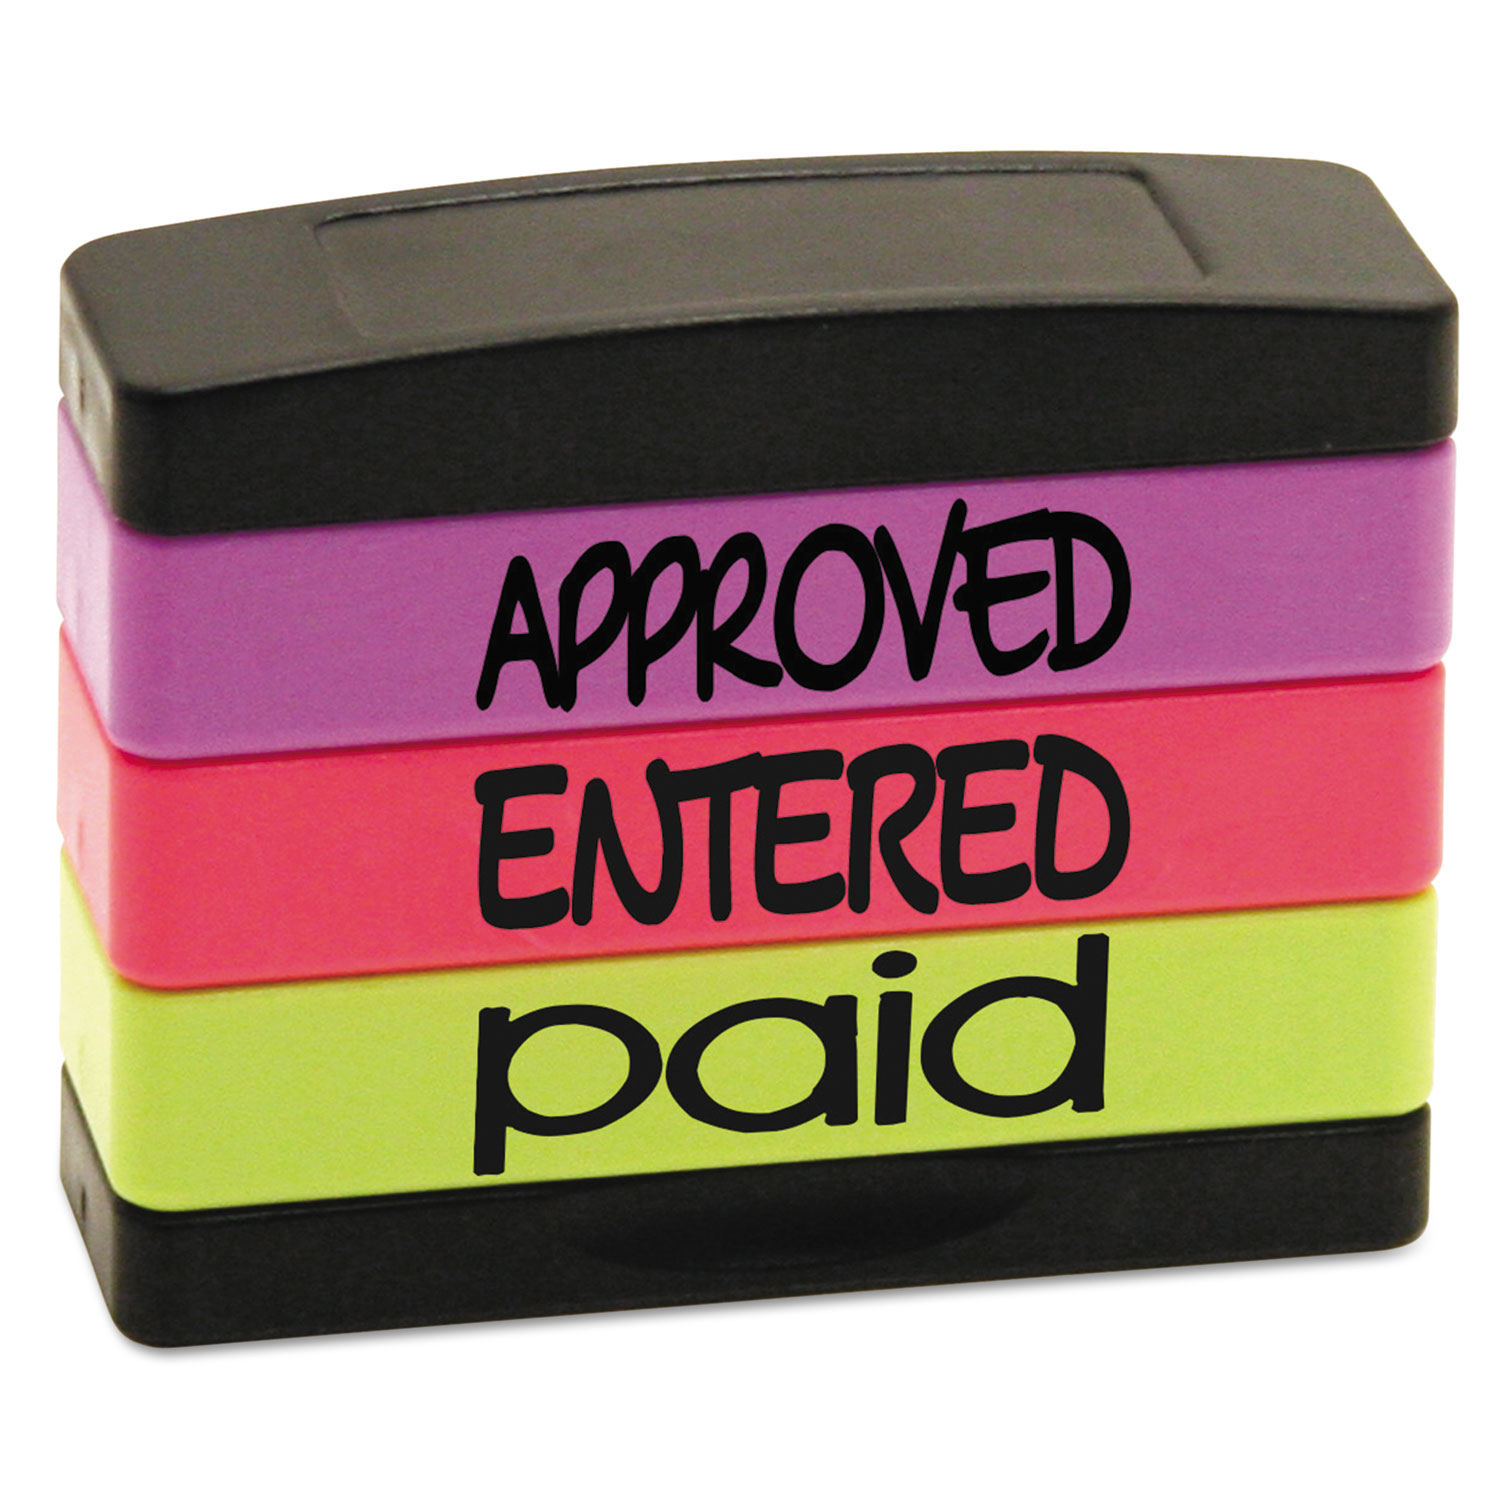  Stack Stamp 8802 Stack Stamp, APPROVED, ENTERED, PAID, 1 13/16 x 5/8, Assorted Fluorescent Ink (USS8802) 